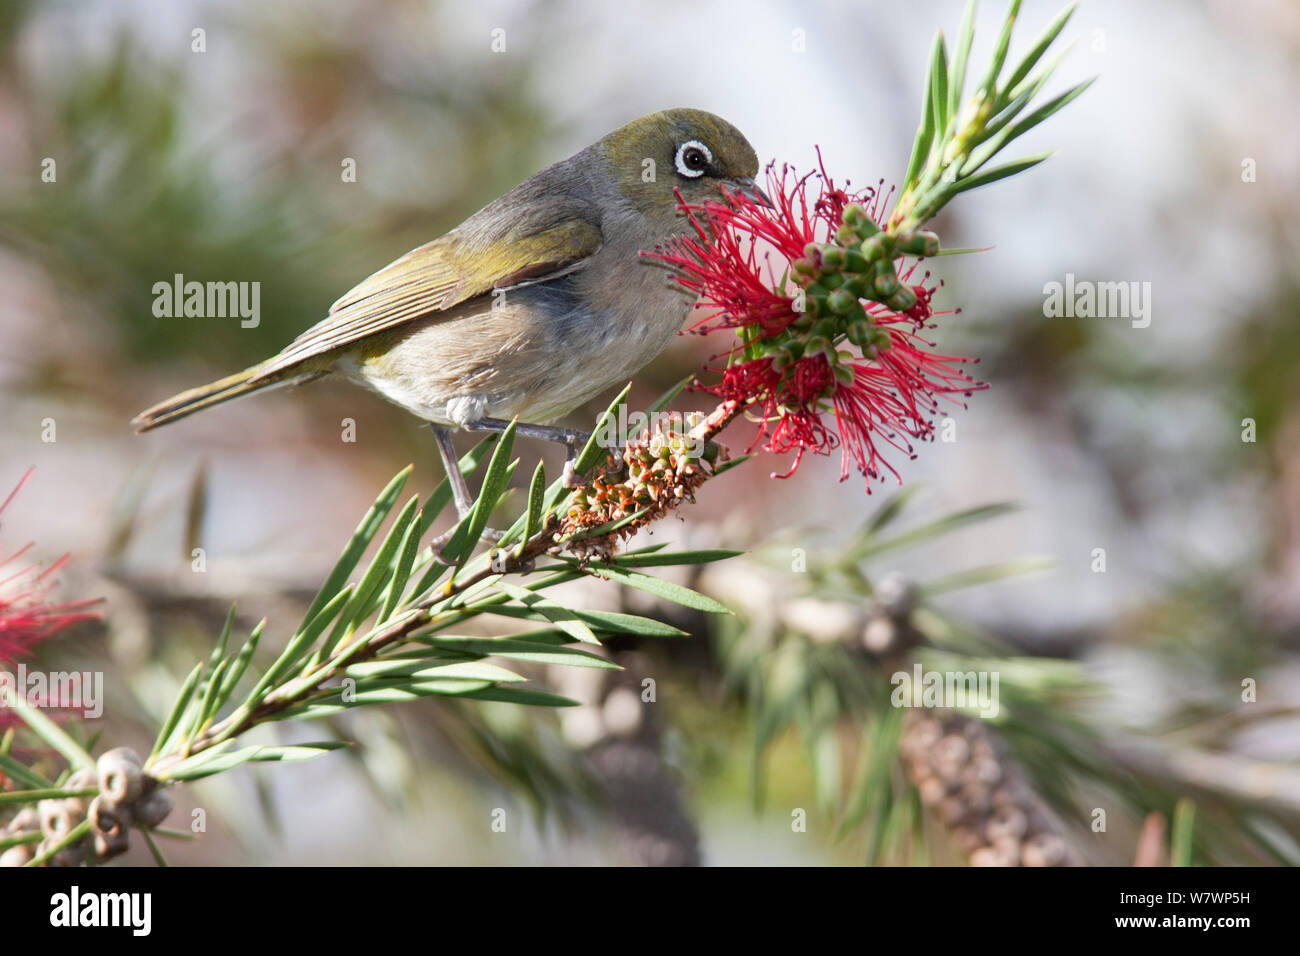 Adult female Silvereye (Zosterops lateralis) feeding on nectar, with worn plumage. Christchurch, Canterbury, New Zealand, December. Stock Photo